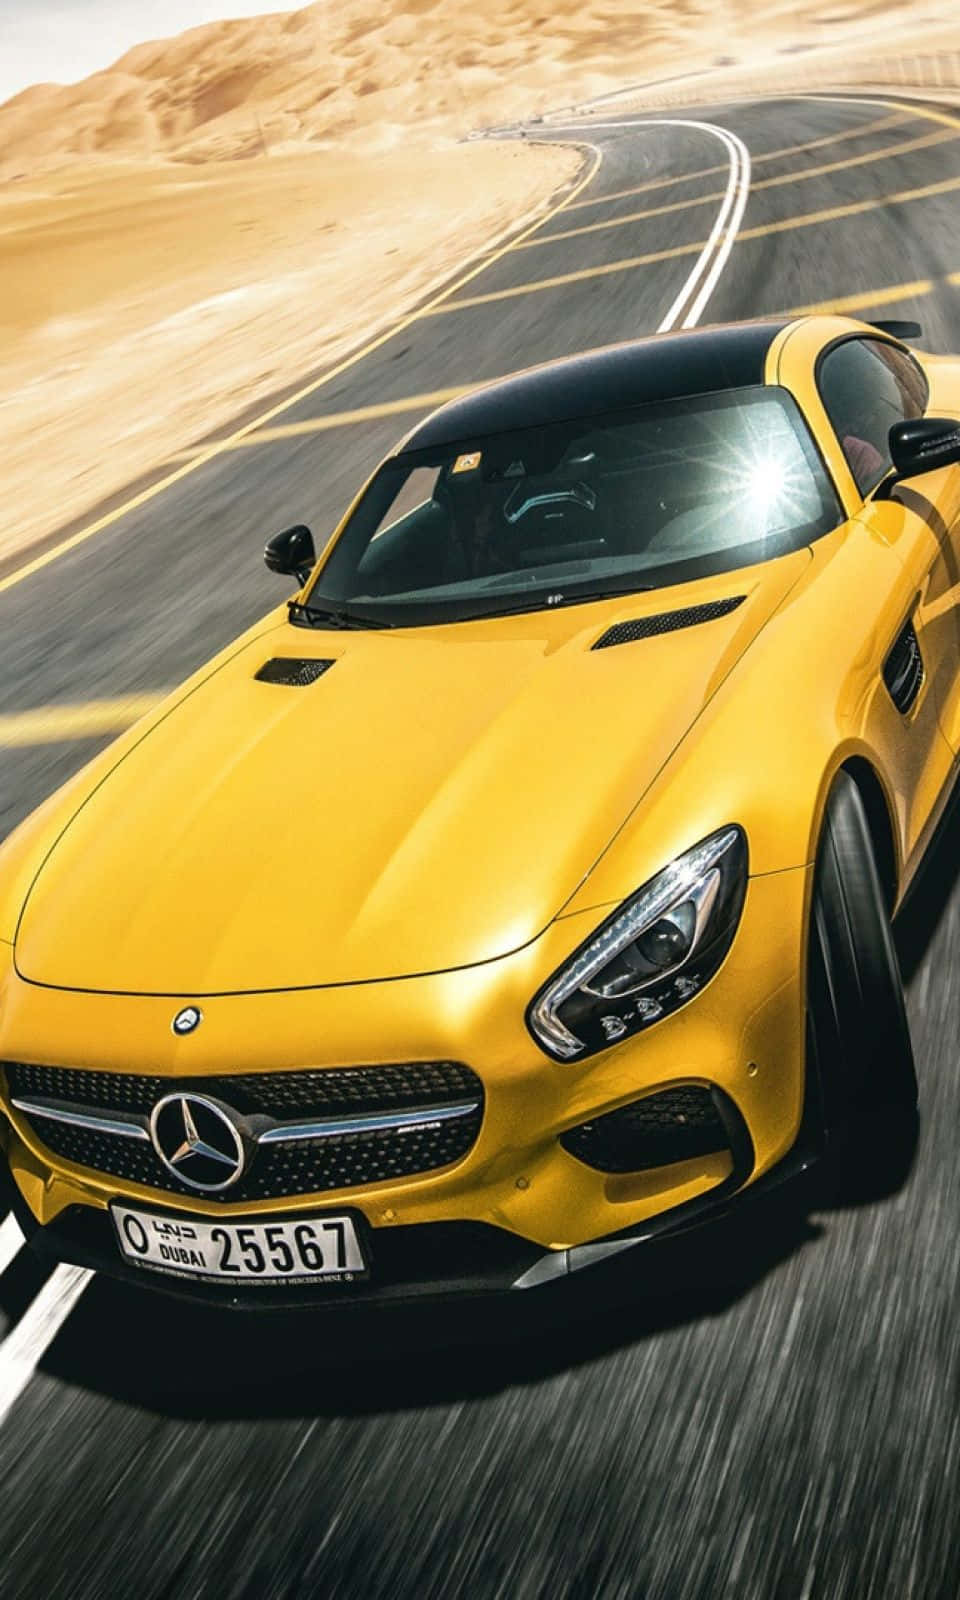 Simplify your life with the Mercedes Benz Phone Wallpaper